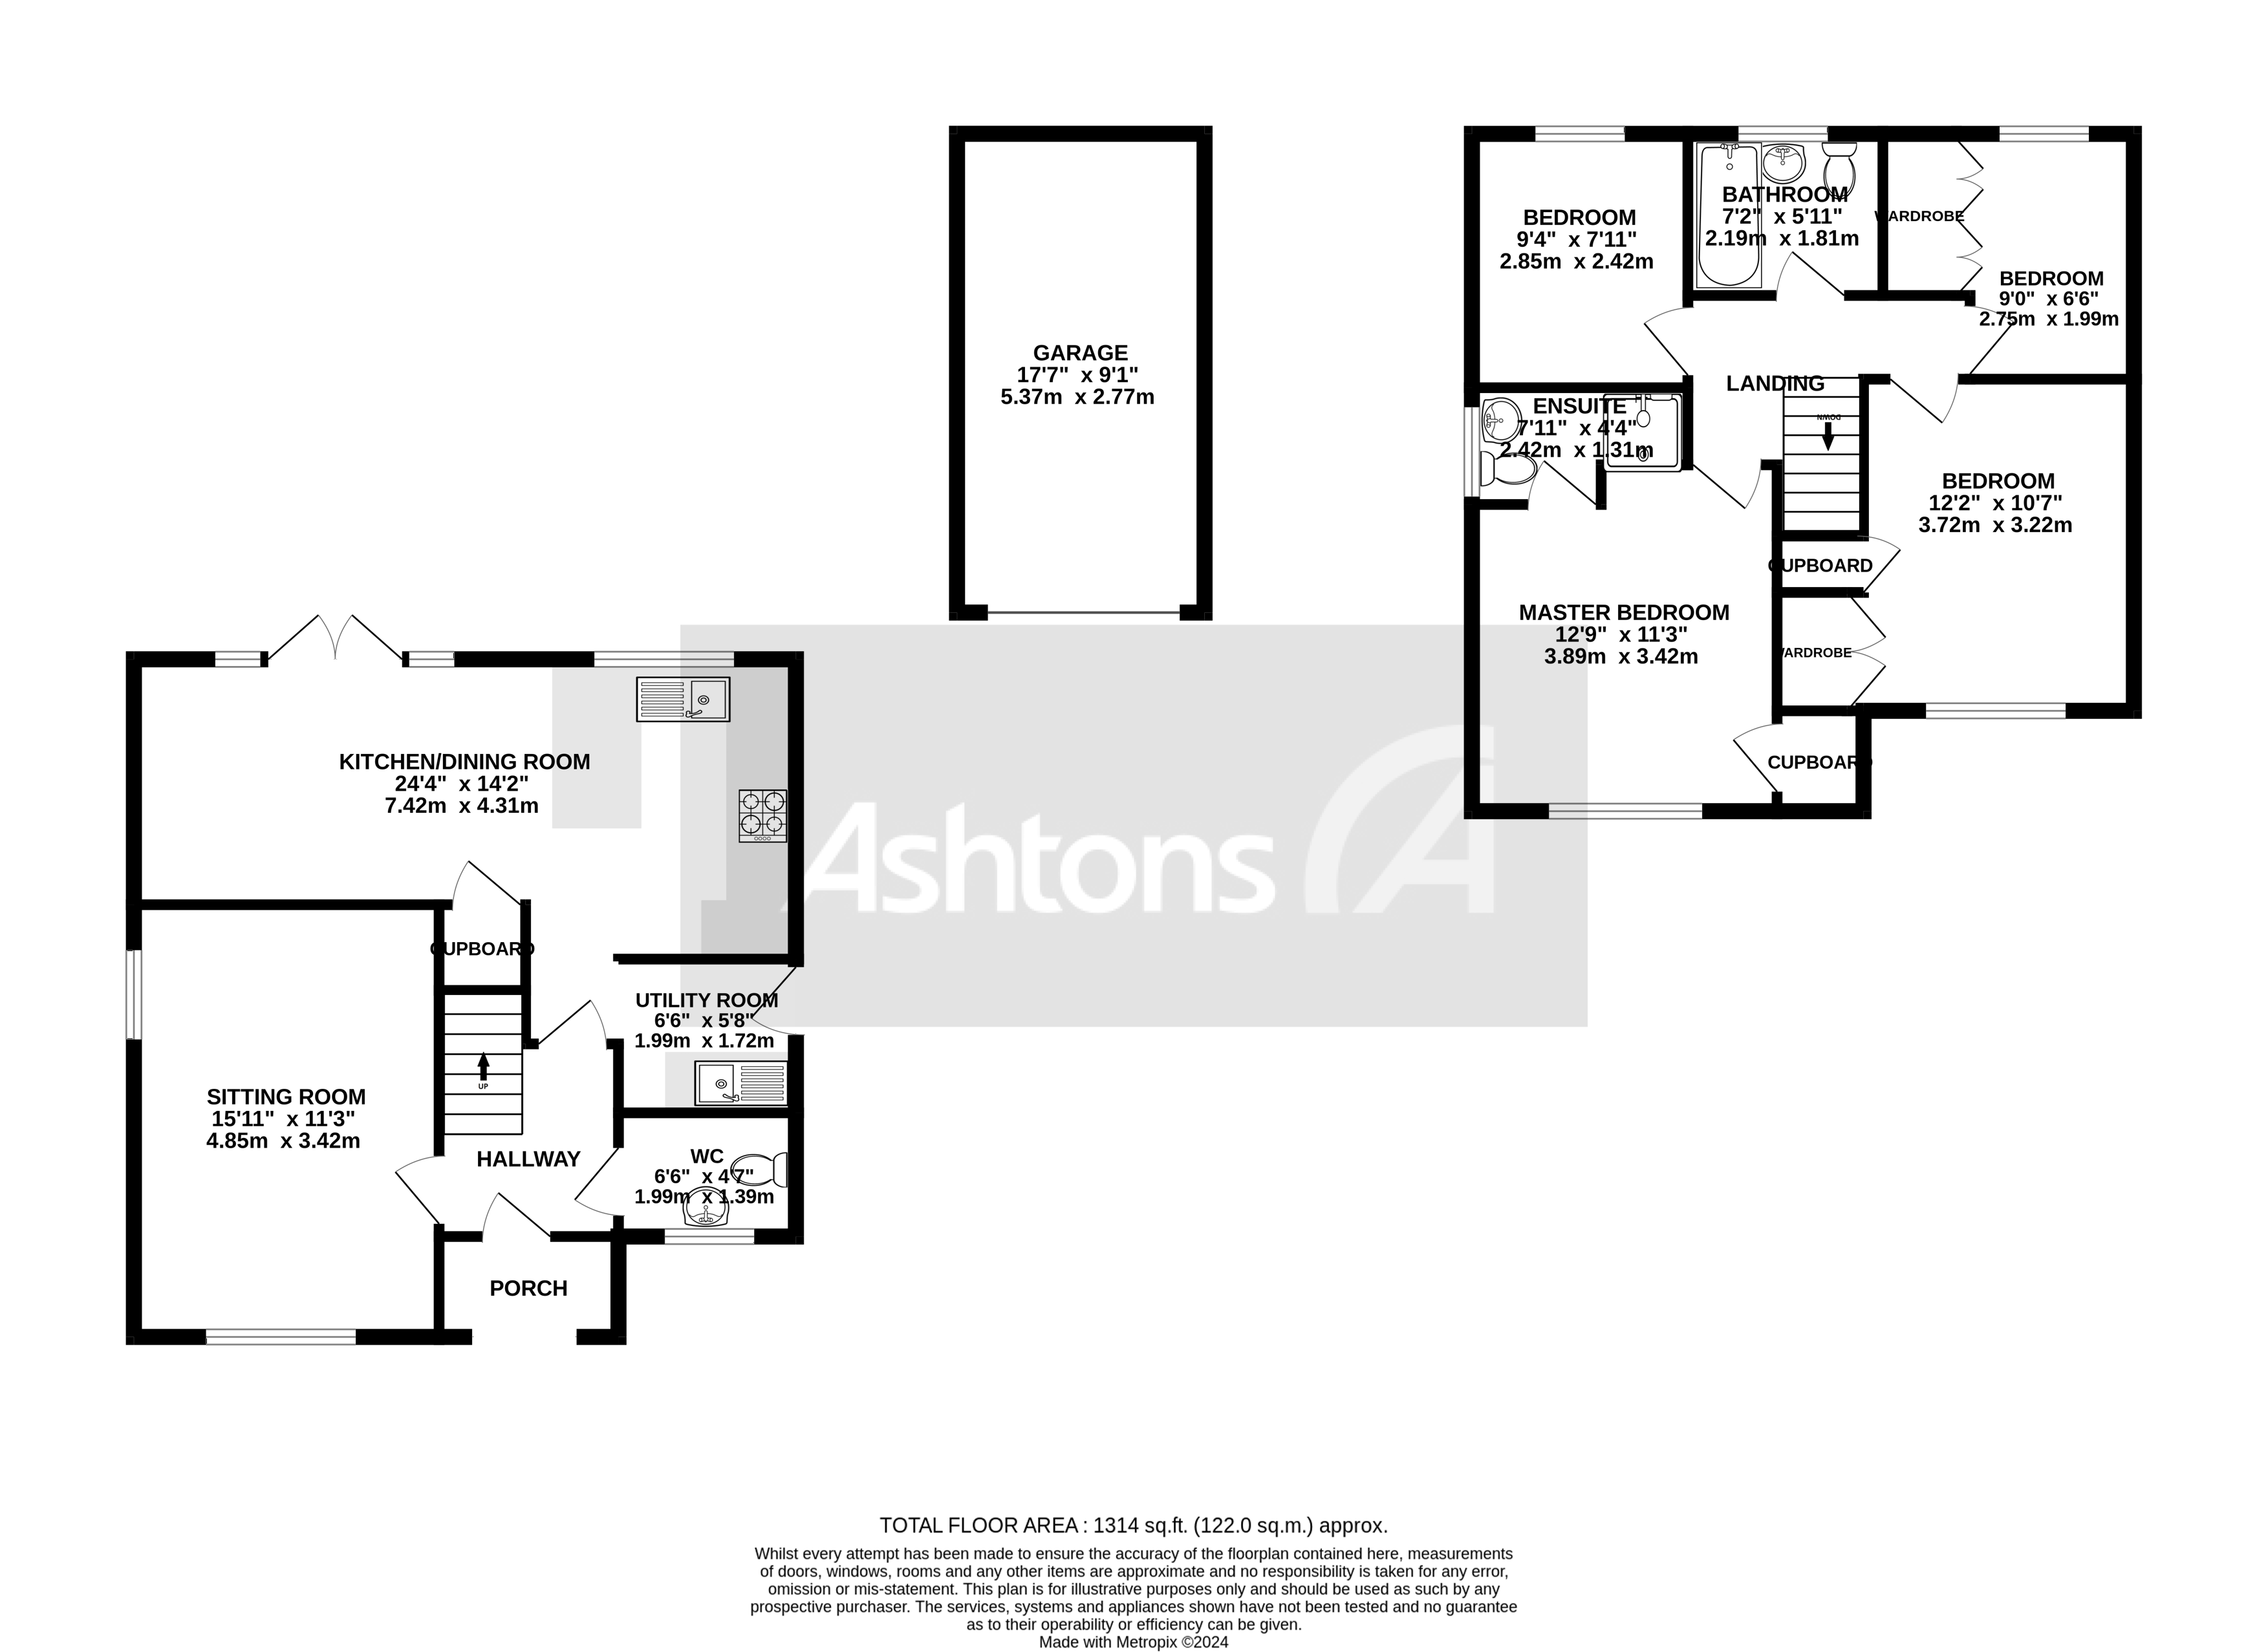 Ansdale Wood Drive, St. Helens Floor Plan